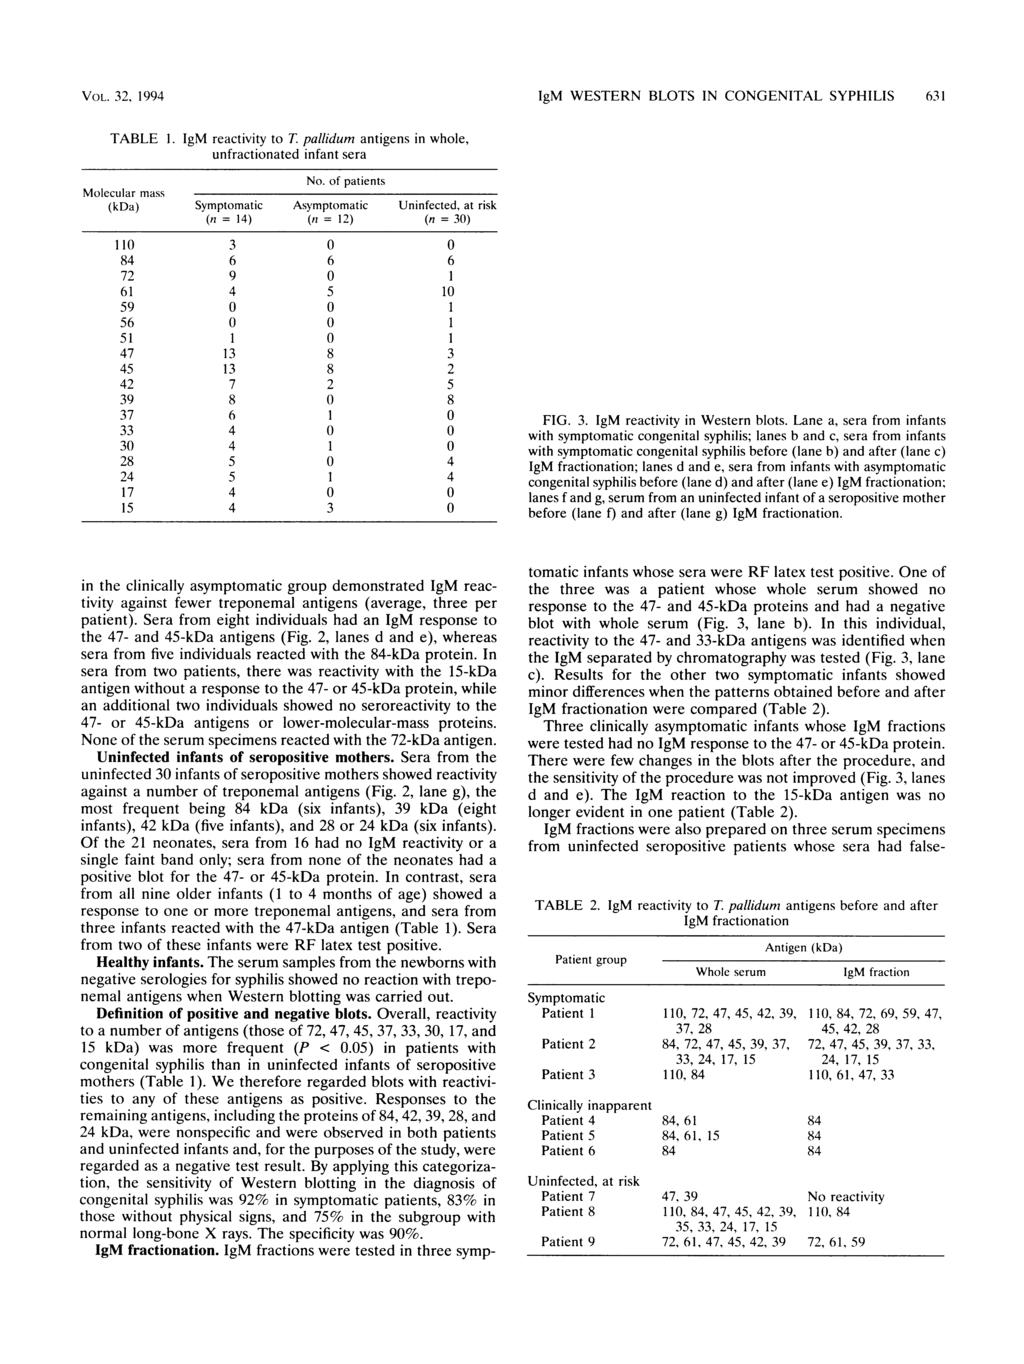 VOL. 32, 1994 TABLE 1. IgM reactivity to T. pallidum antigens in whole, unfractionated infant sera No.